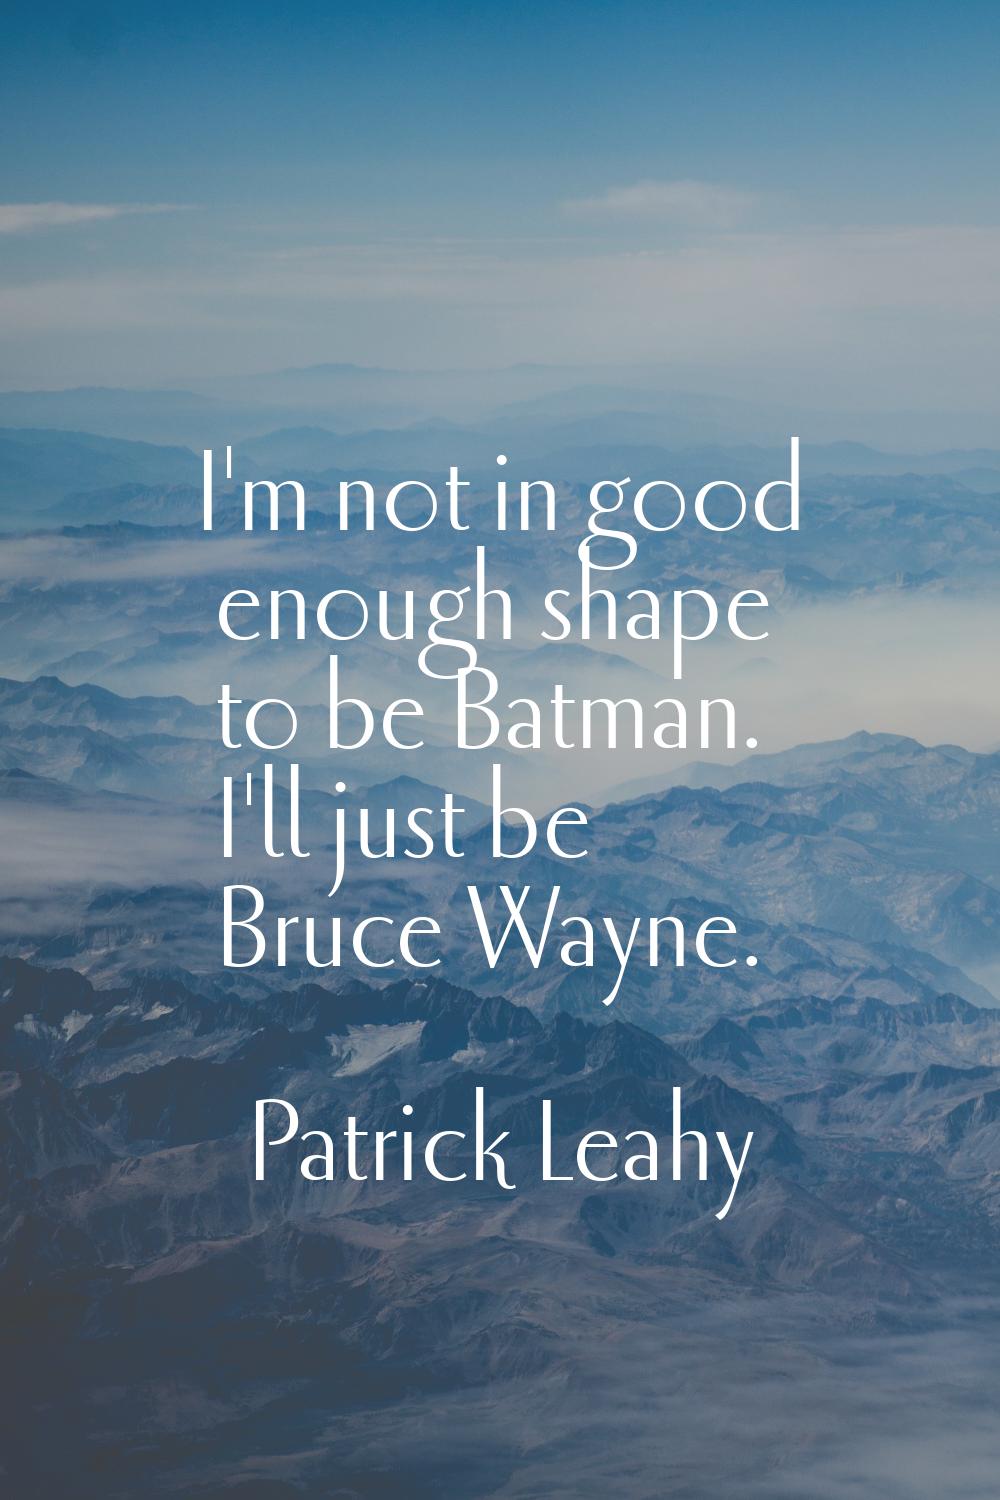 I'm not in good enough shape to be Batman. I'll just be Bruce Wayne.